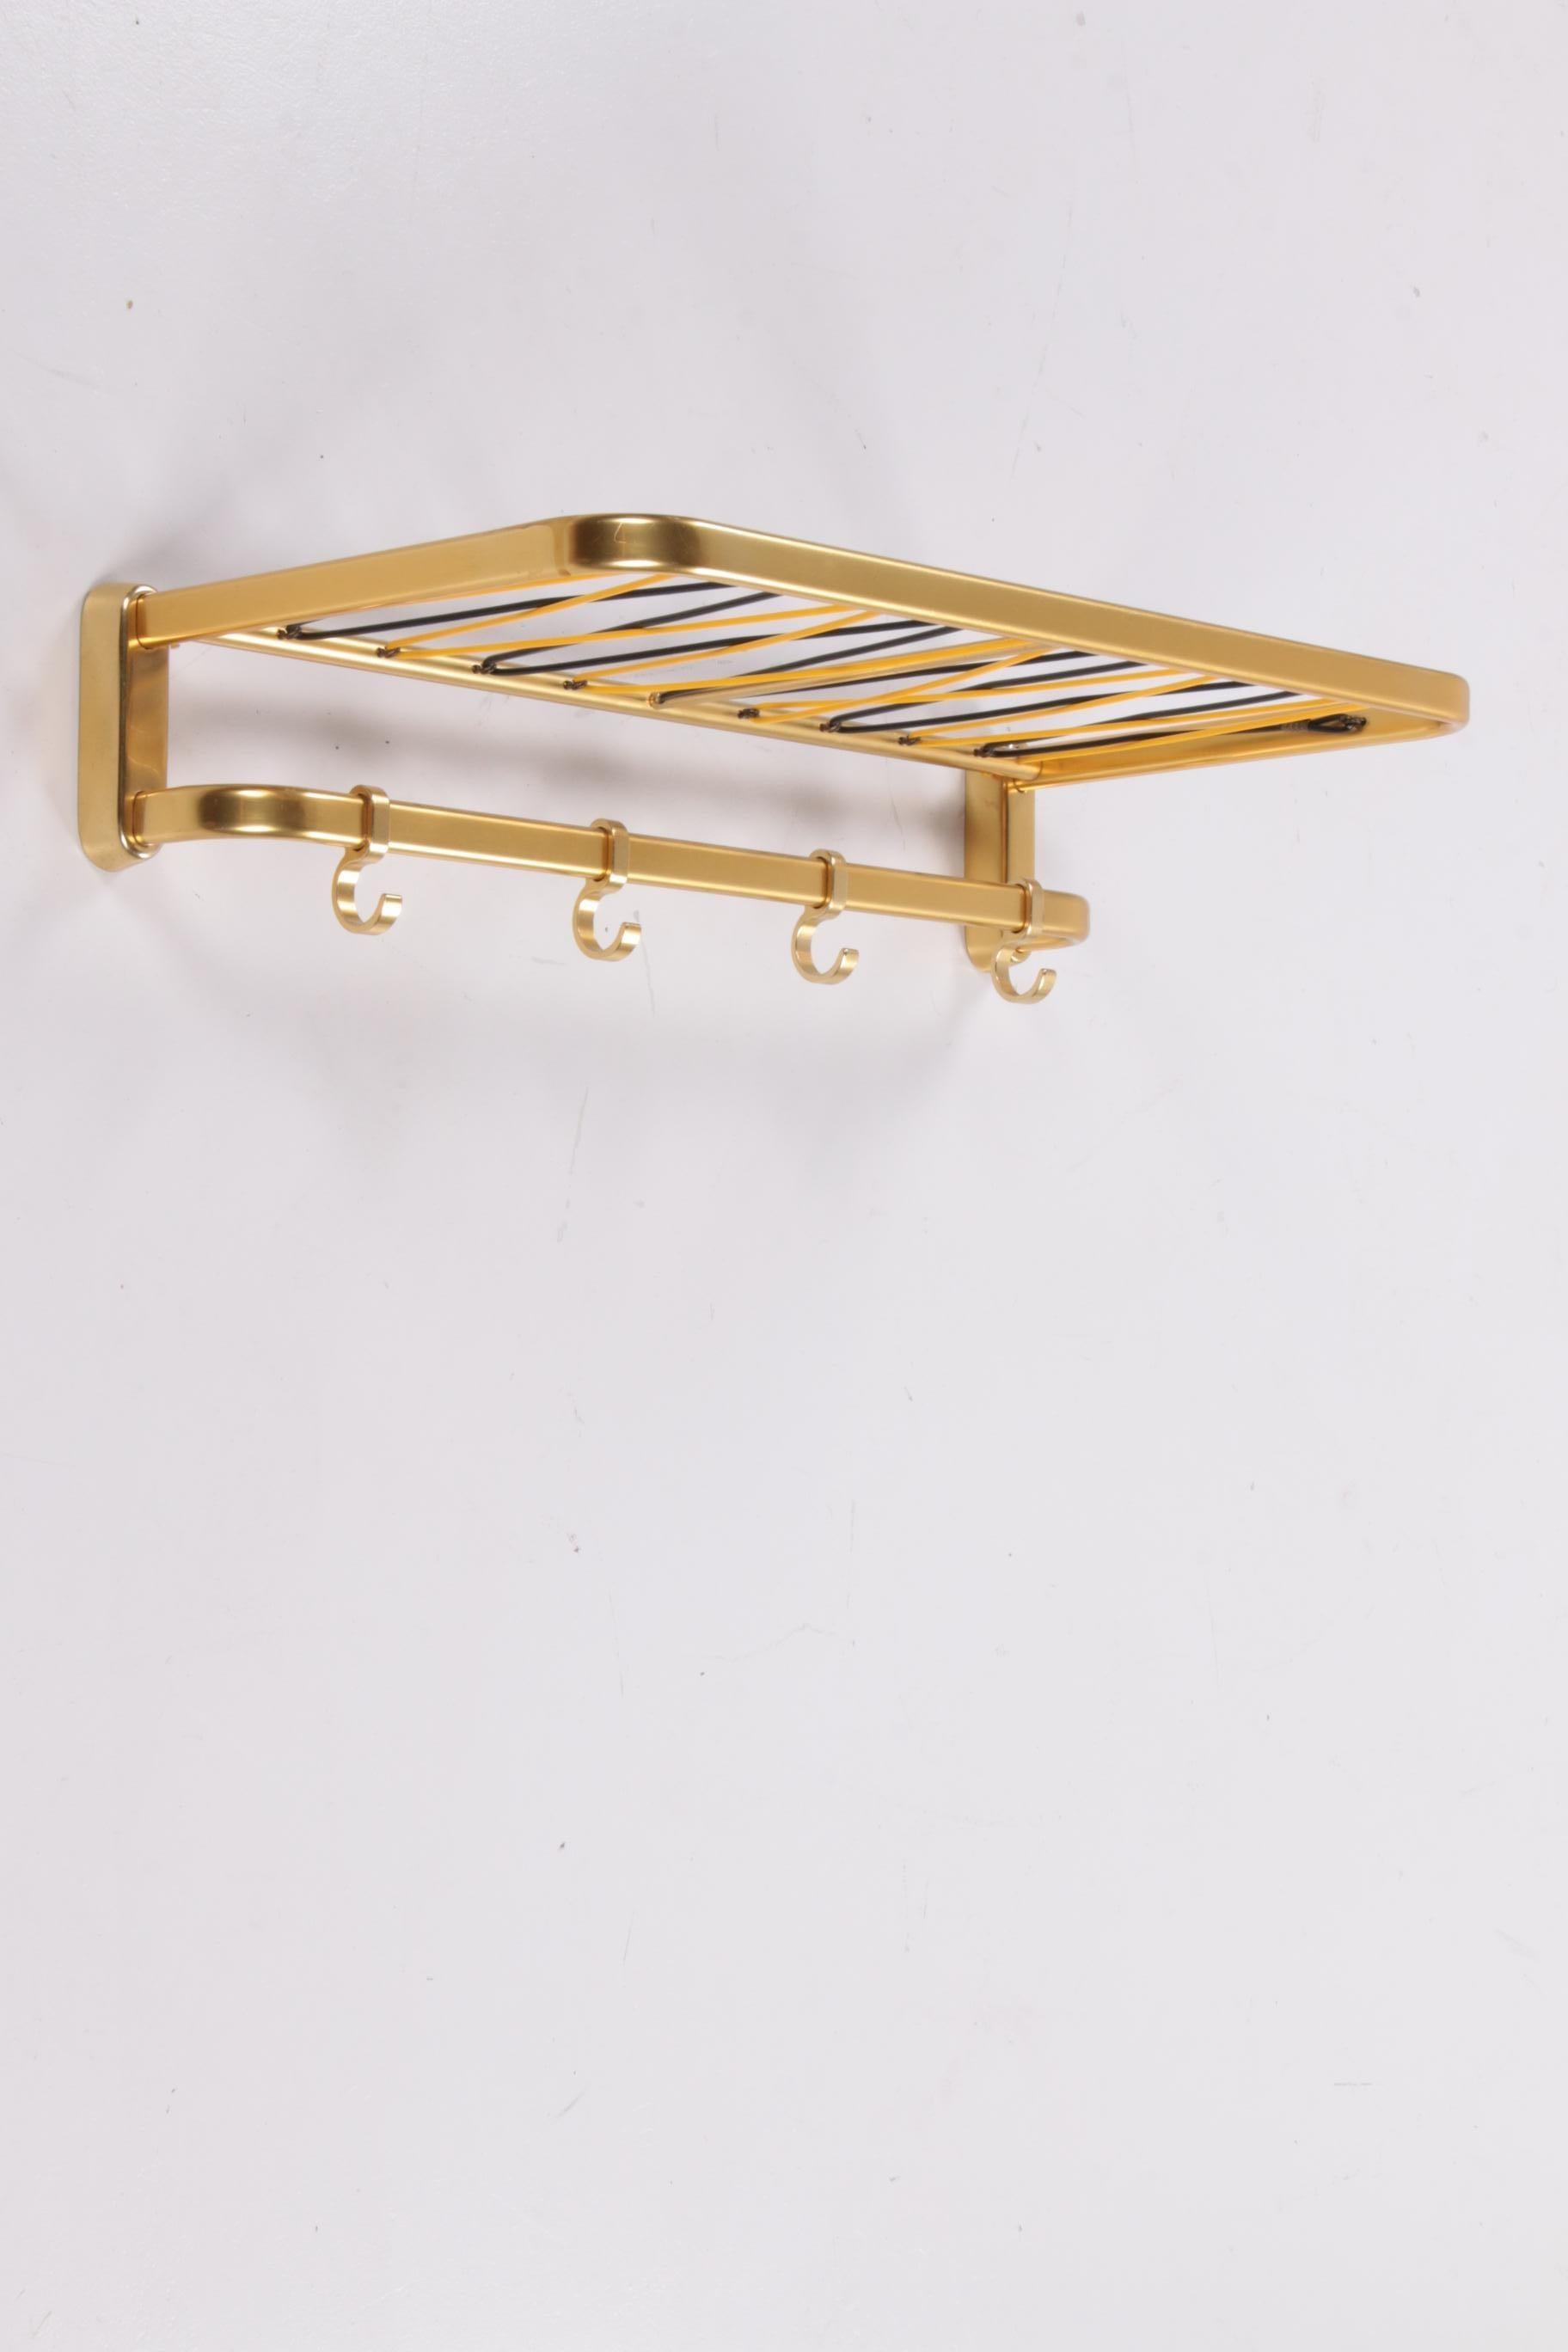 Wall coat rack Hollywood Regency style 1960s


Gold-coloured aluminum coat rack from Germany.

There is an extra rack under the top rack.

Probably made in the 1960s, now completely hip again.

Some discoloration in some places, which is not unusual